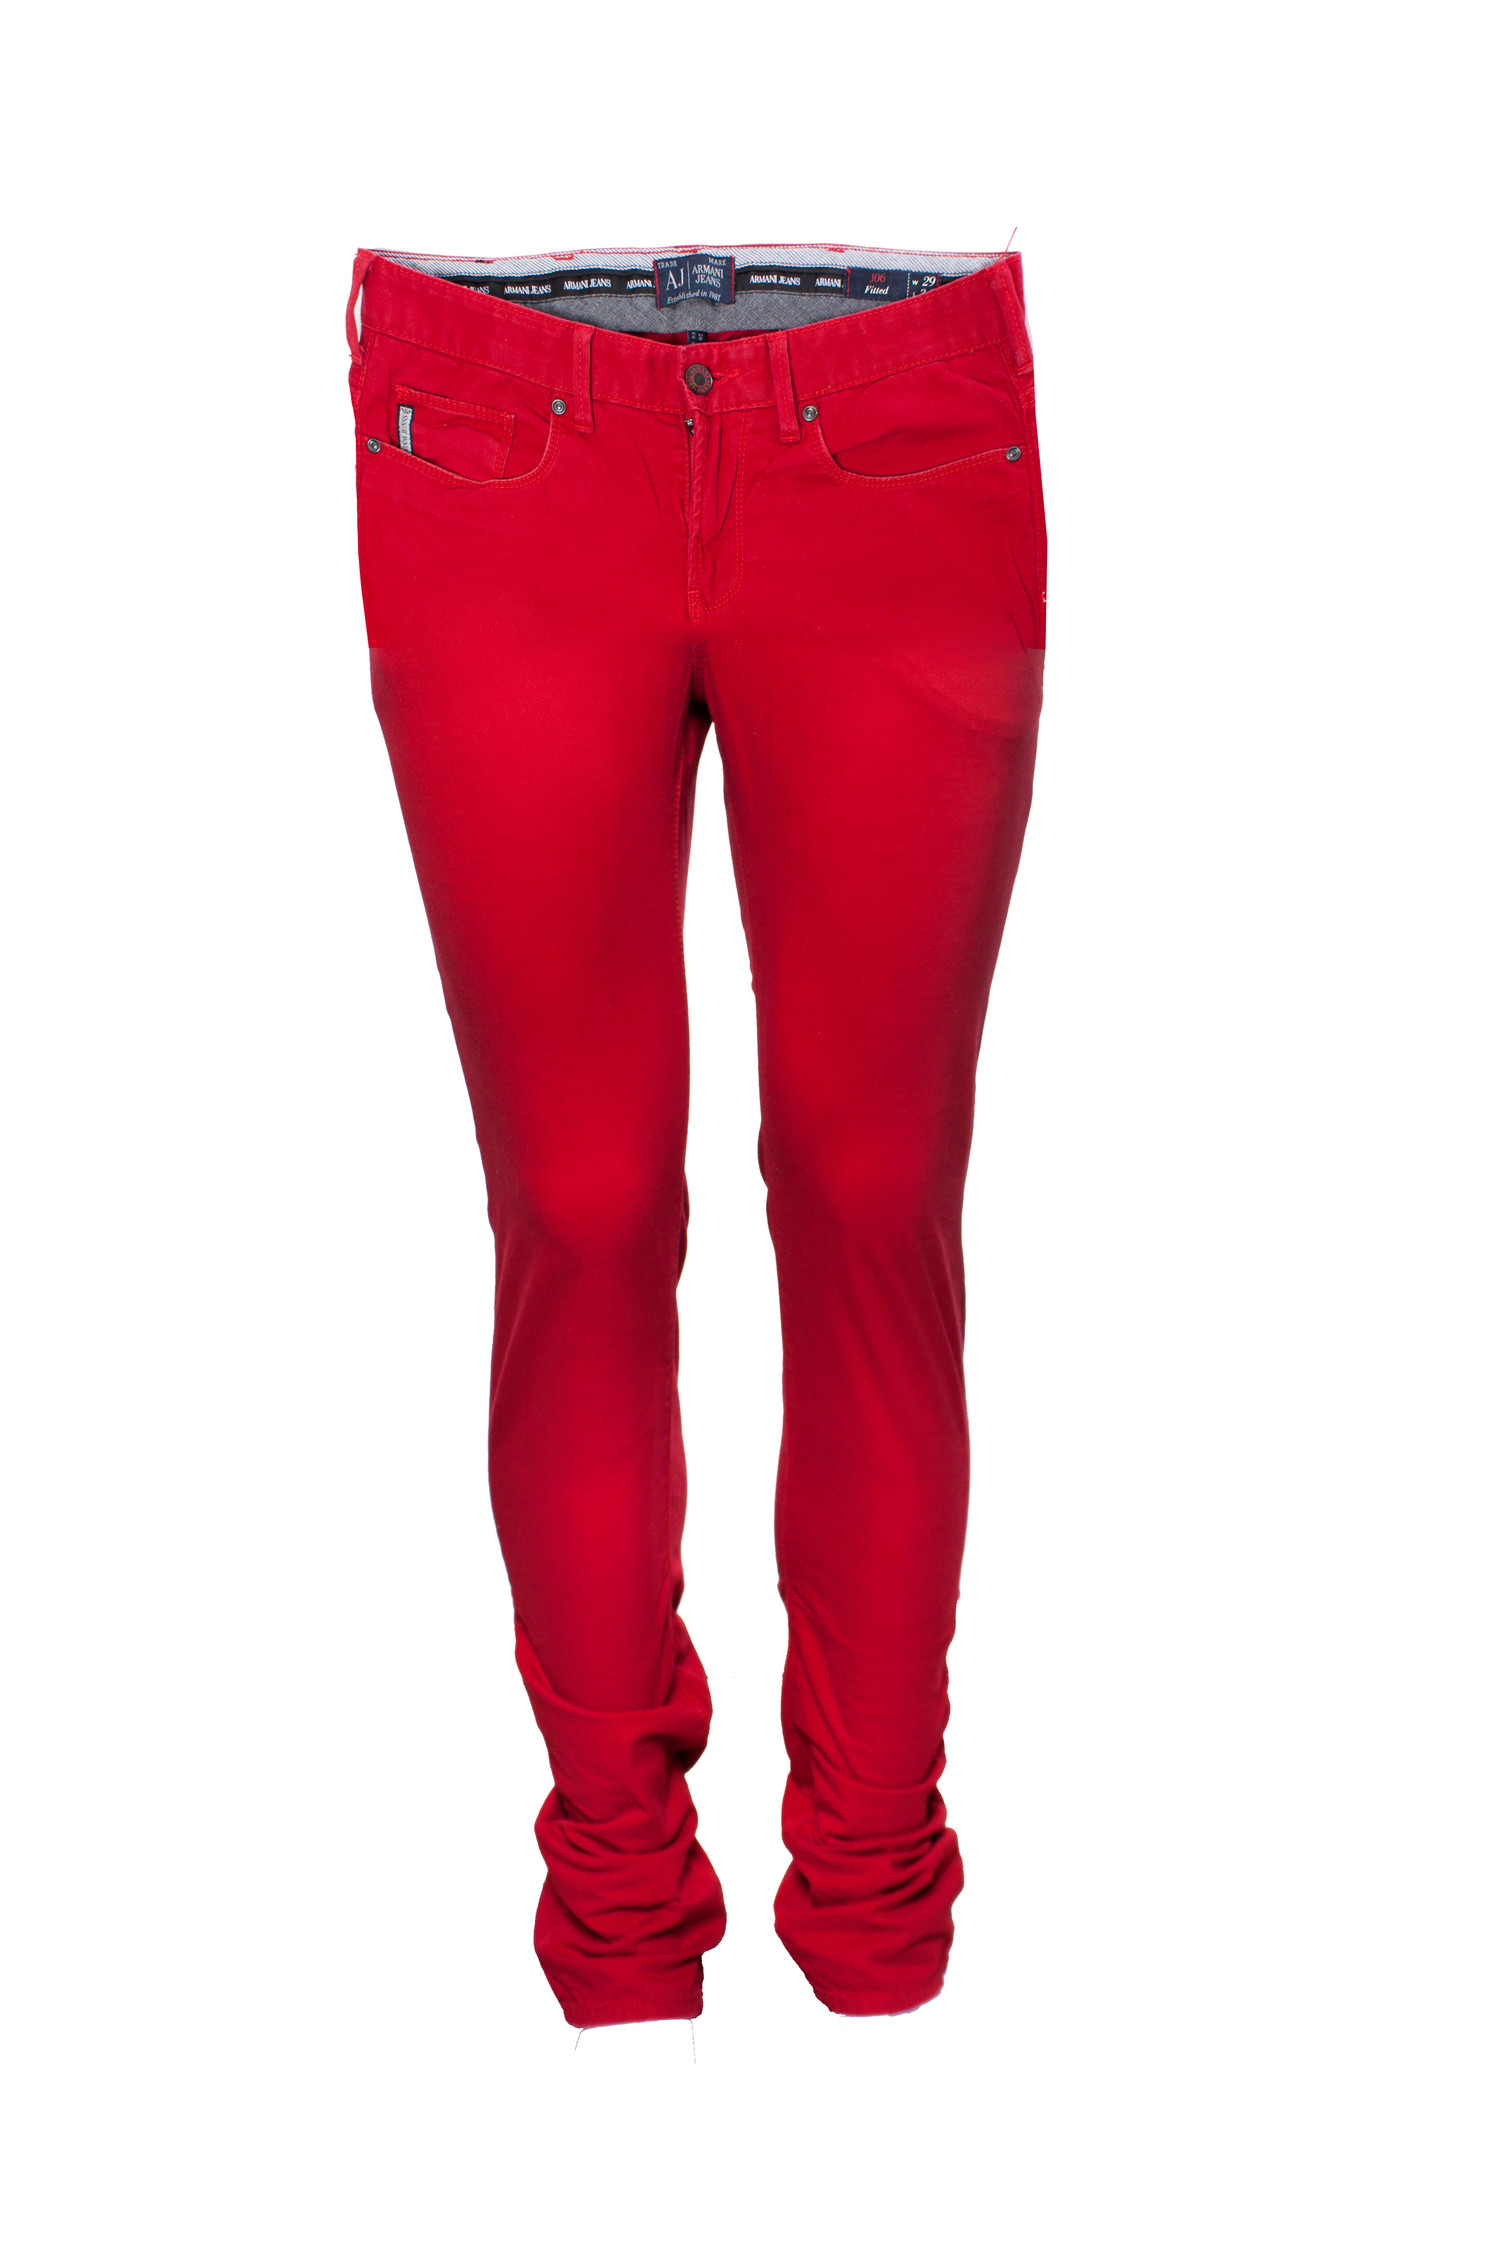 Armani Jeans, Red jeans in size W29/S 